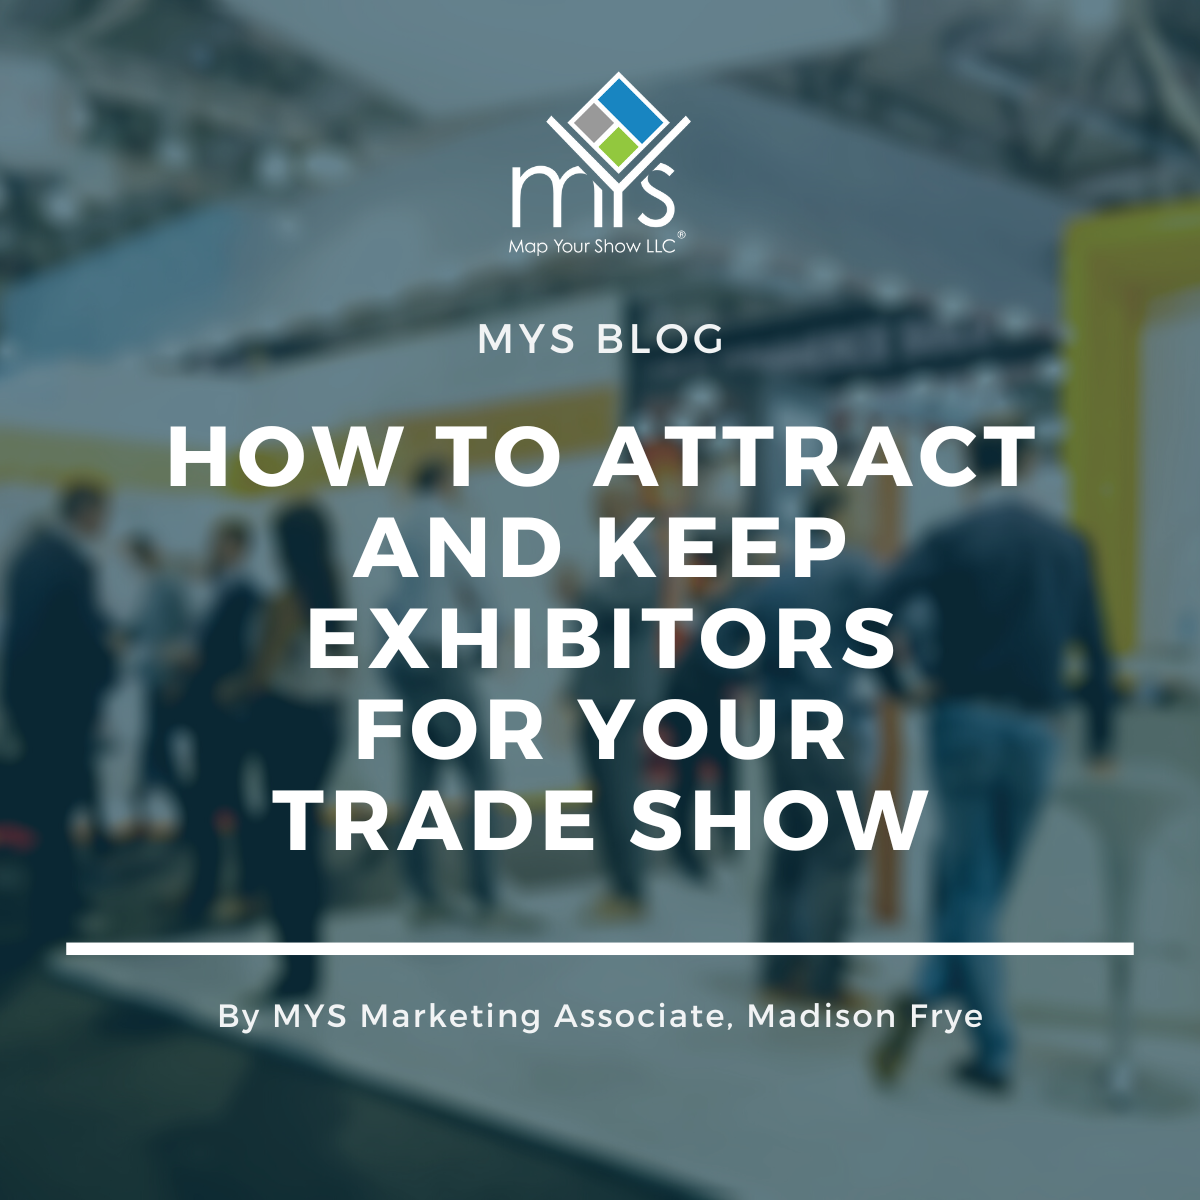 How to Attract and Keep Exhibitors for Your Trade Show Blog. By Marketing Associate, Madison Frye